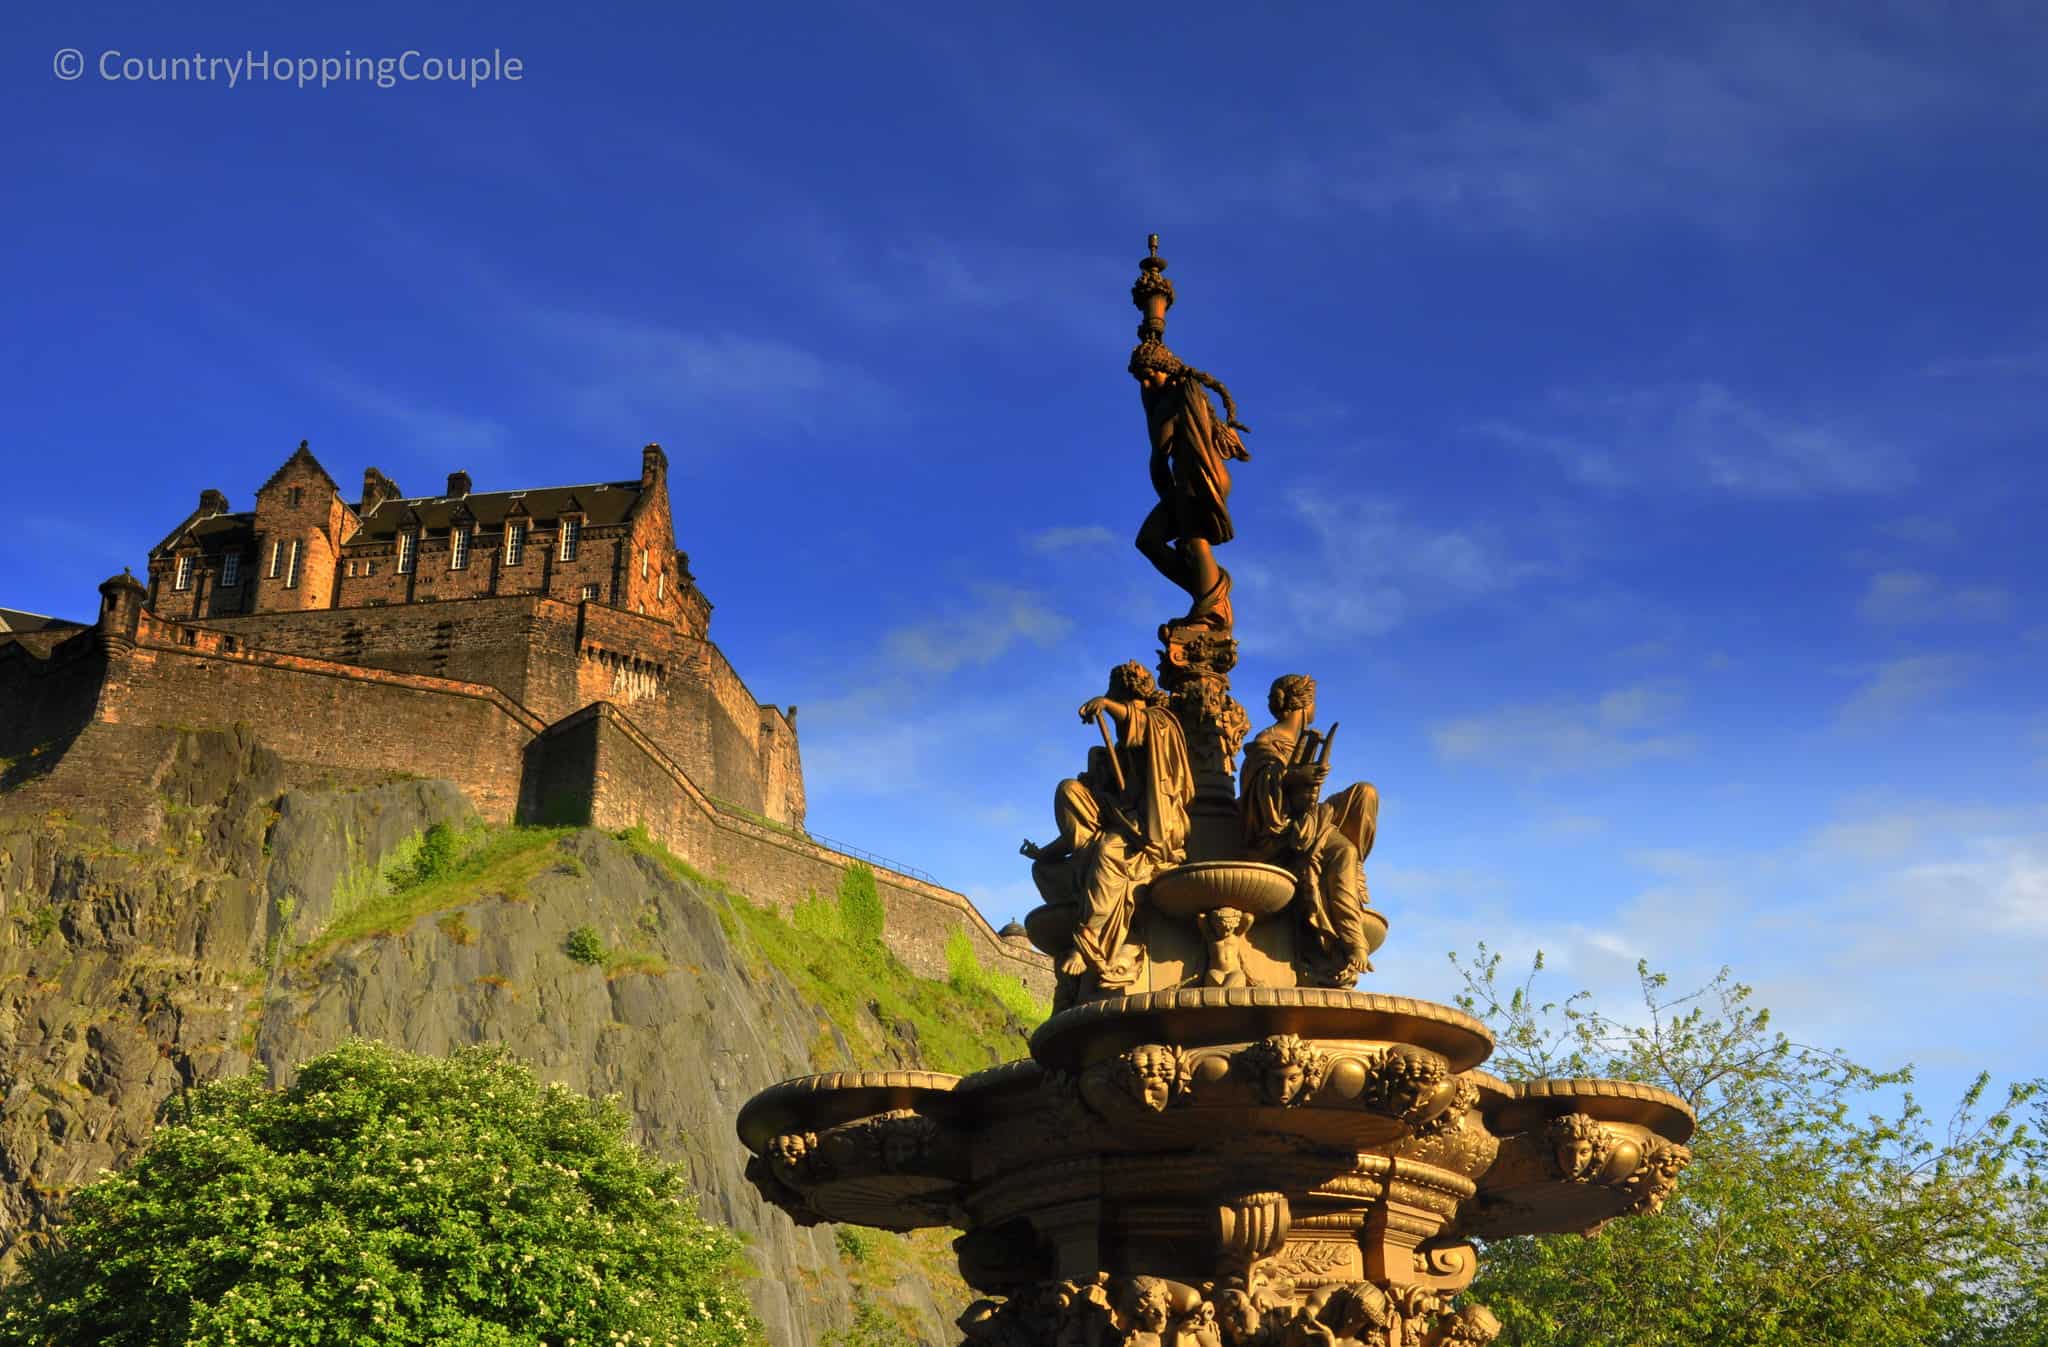 The Enchanting Castles Of Scotland: A UAE Nomads Tale.